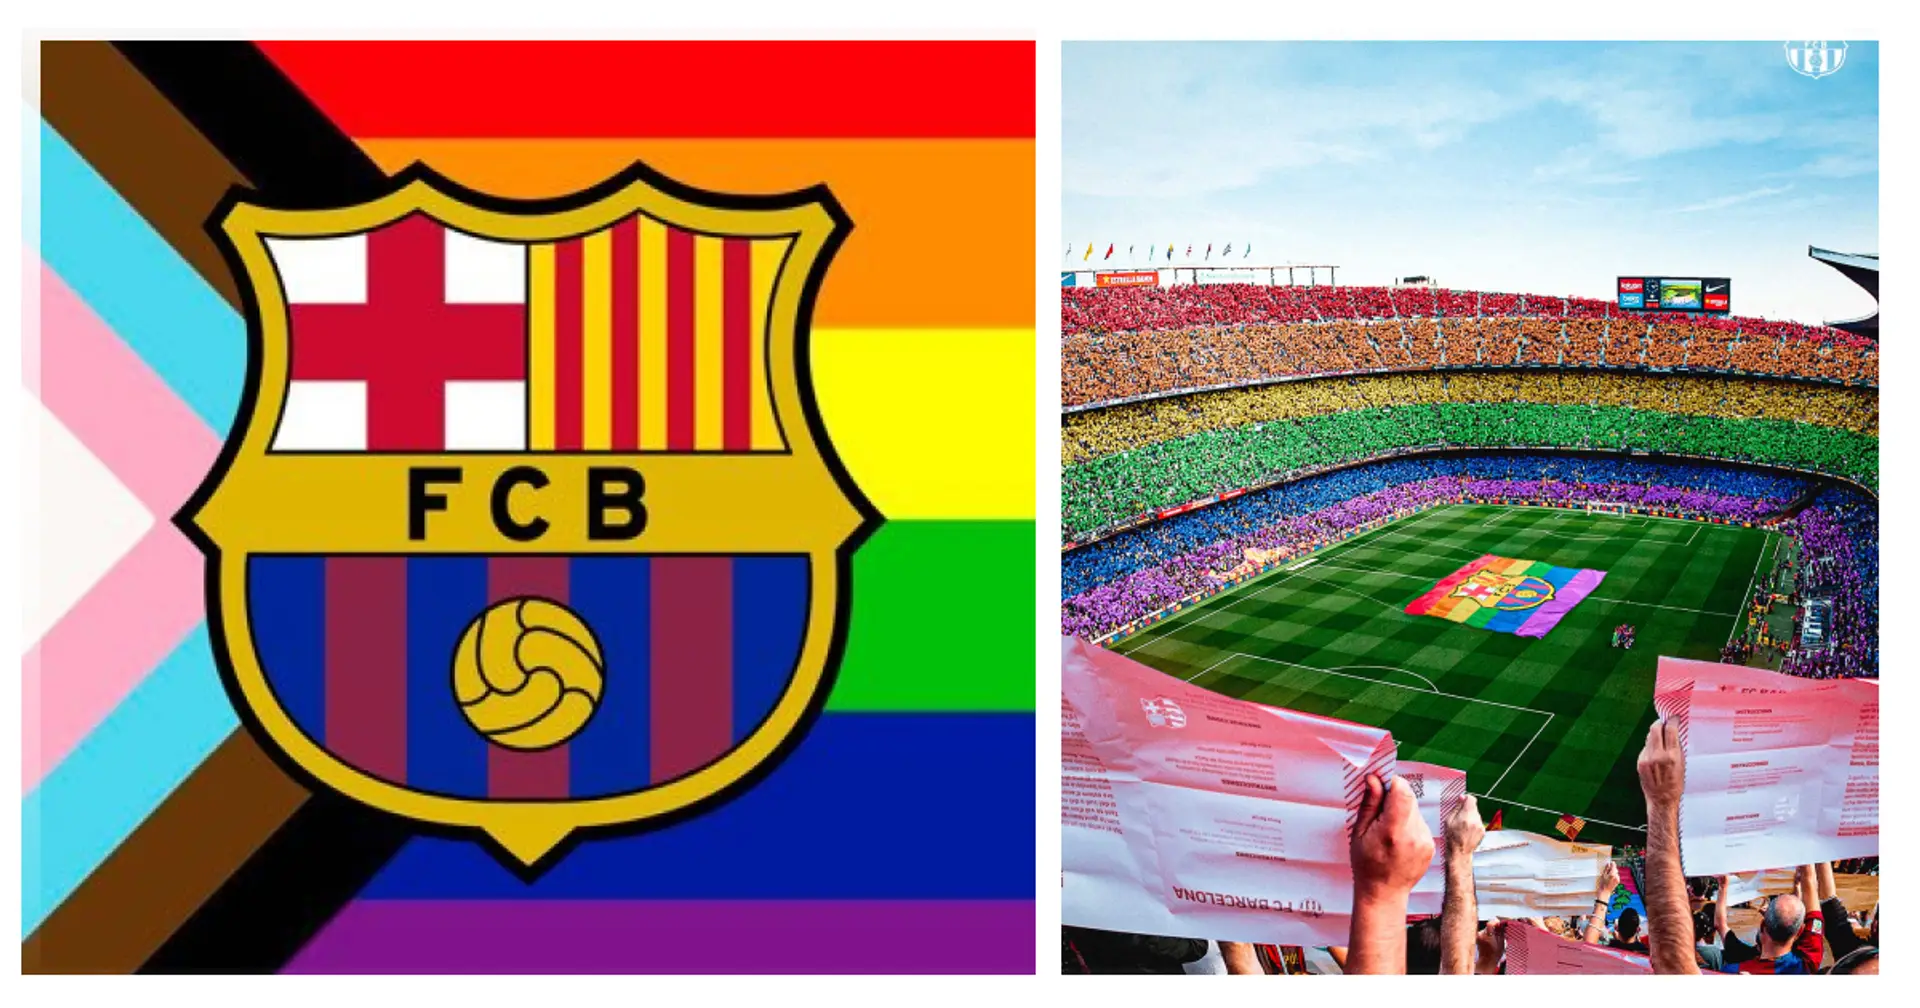 Find another club if you have a problem with a pride flag